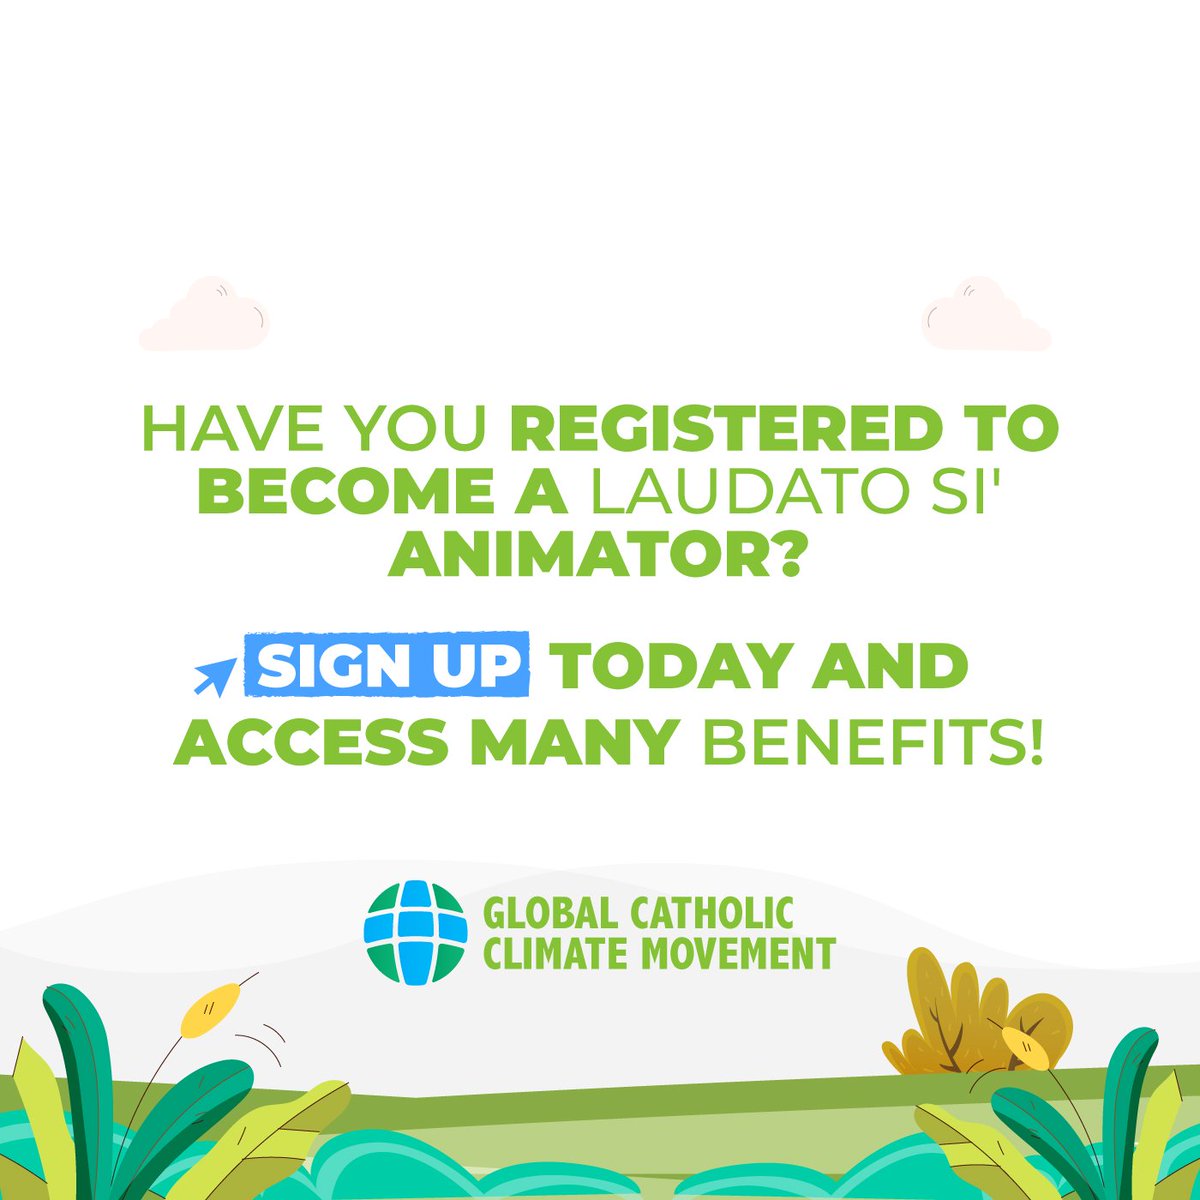 3 benefits of the upcoming #LaudatoSiAnimator training!

You will get free online training.

You will learn how to lead your community.

You will get an international certification.

Join the largest network of Catholics caring for the planet! REGISTER at bit.ly/LSAEngage